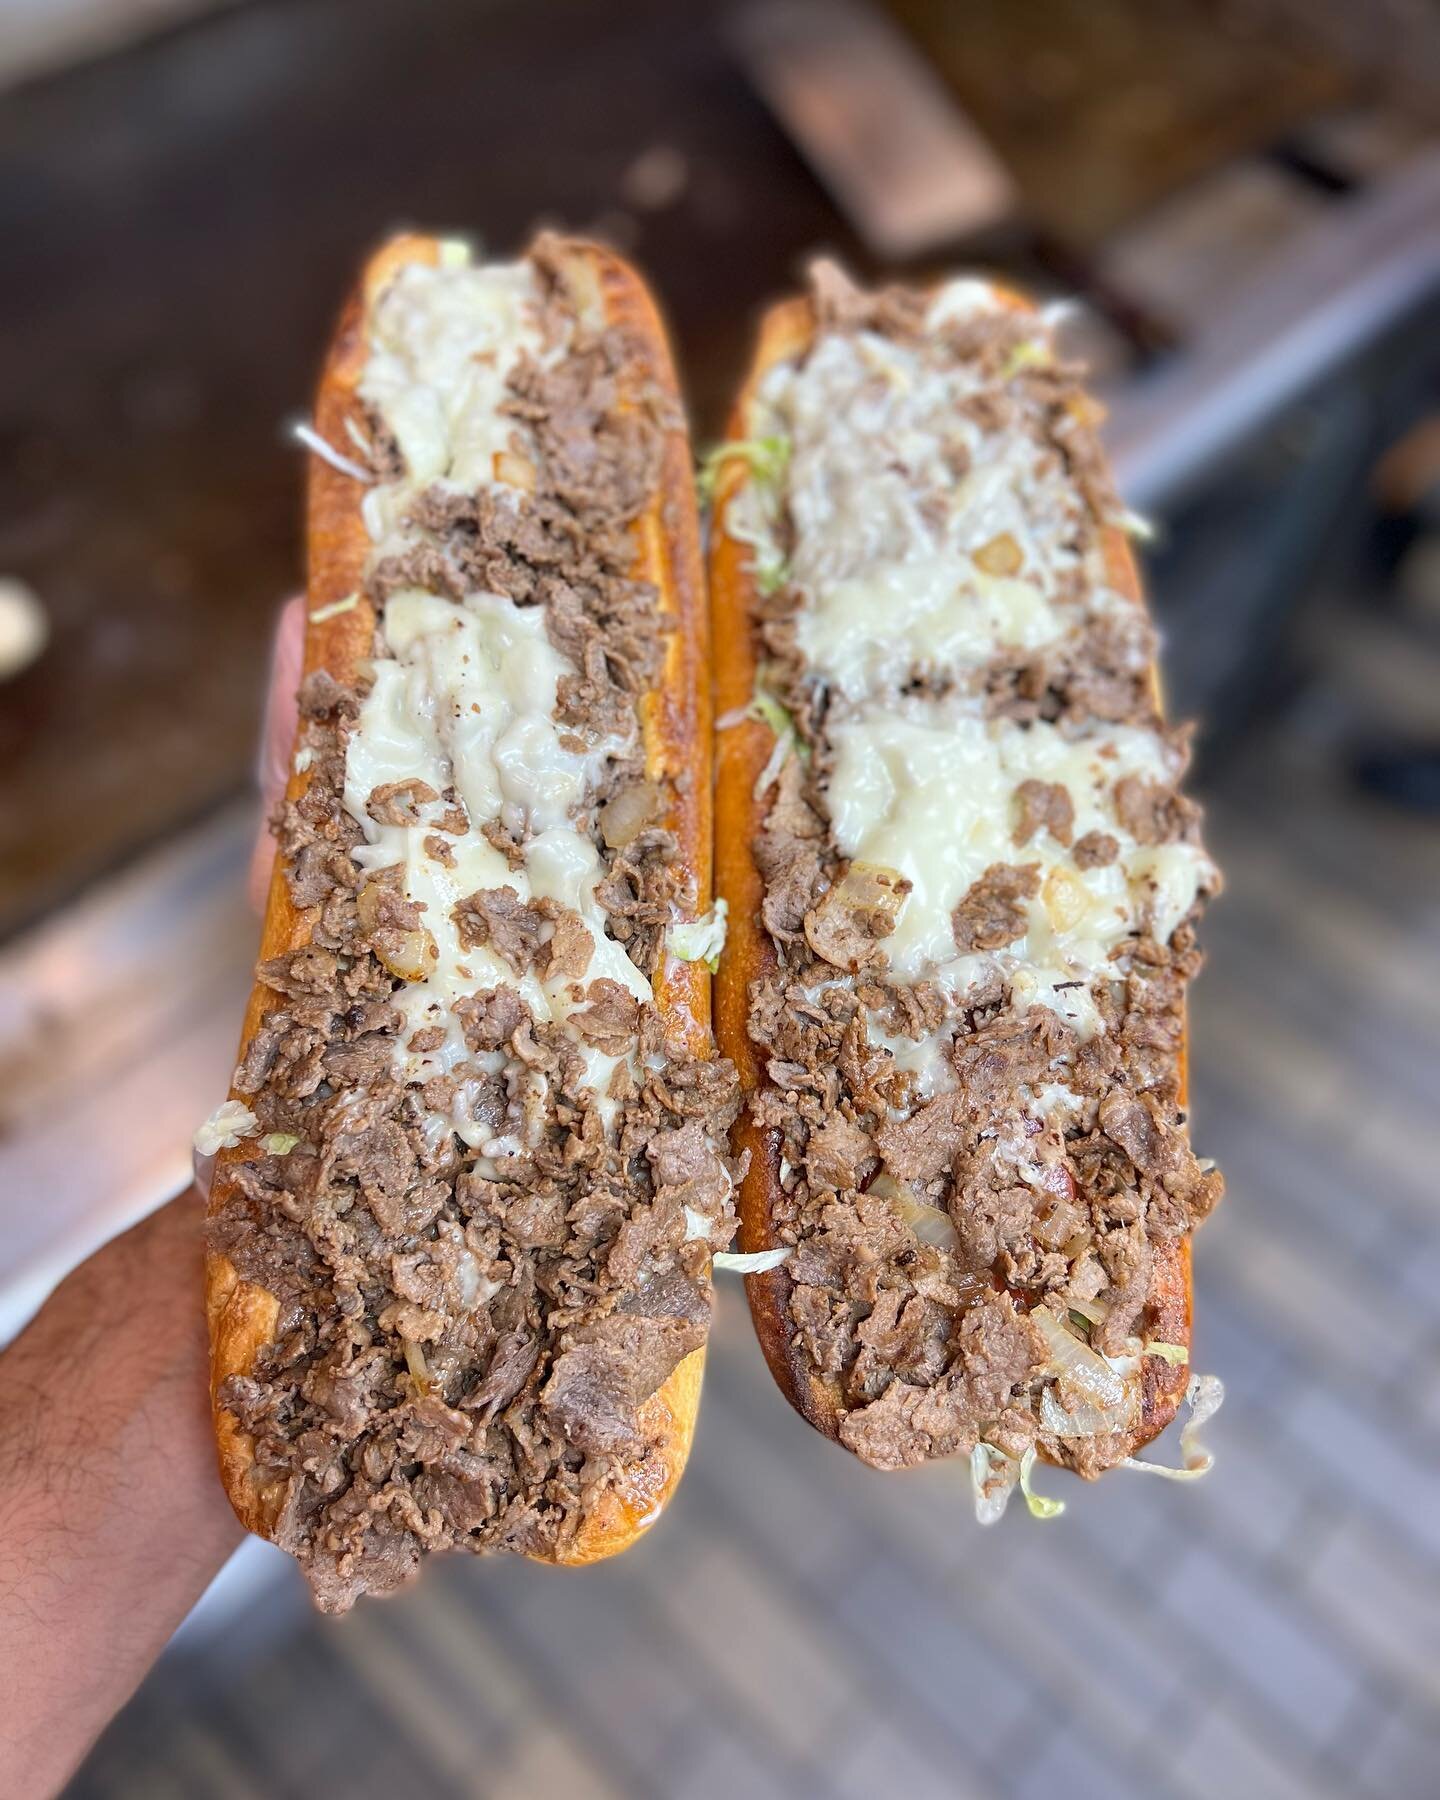 Top quality of 1/2 pound sirloin steak topped with American cheese with fresh mushrooms and fried onions on daily fresh baked roll 🥖 🥩 🧀 🍄 🧅 #philly#philadelphiafoodie
#phillypizza #phillyfoodforeal #phillyfoodblogger #philadelphiafood #openinph